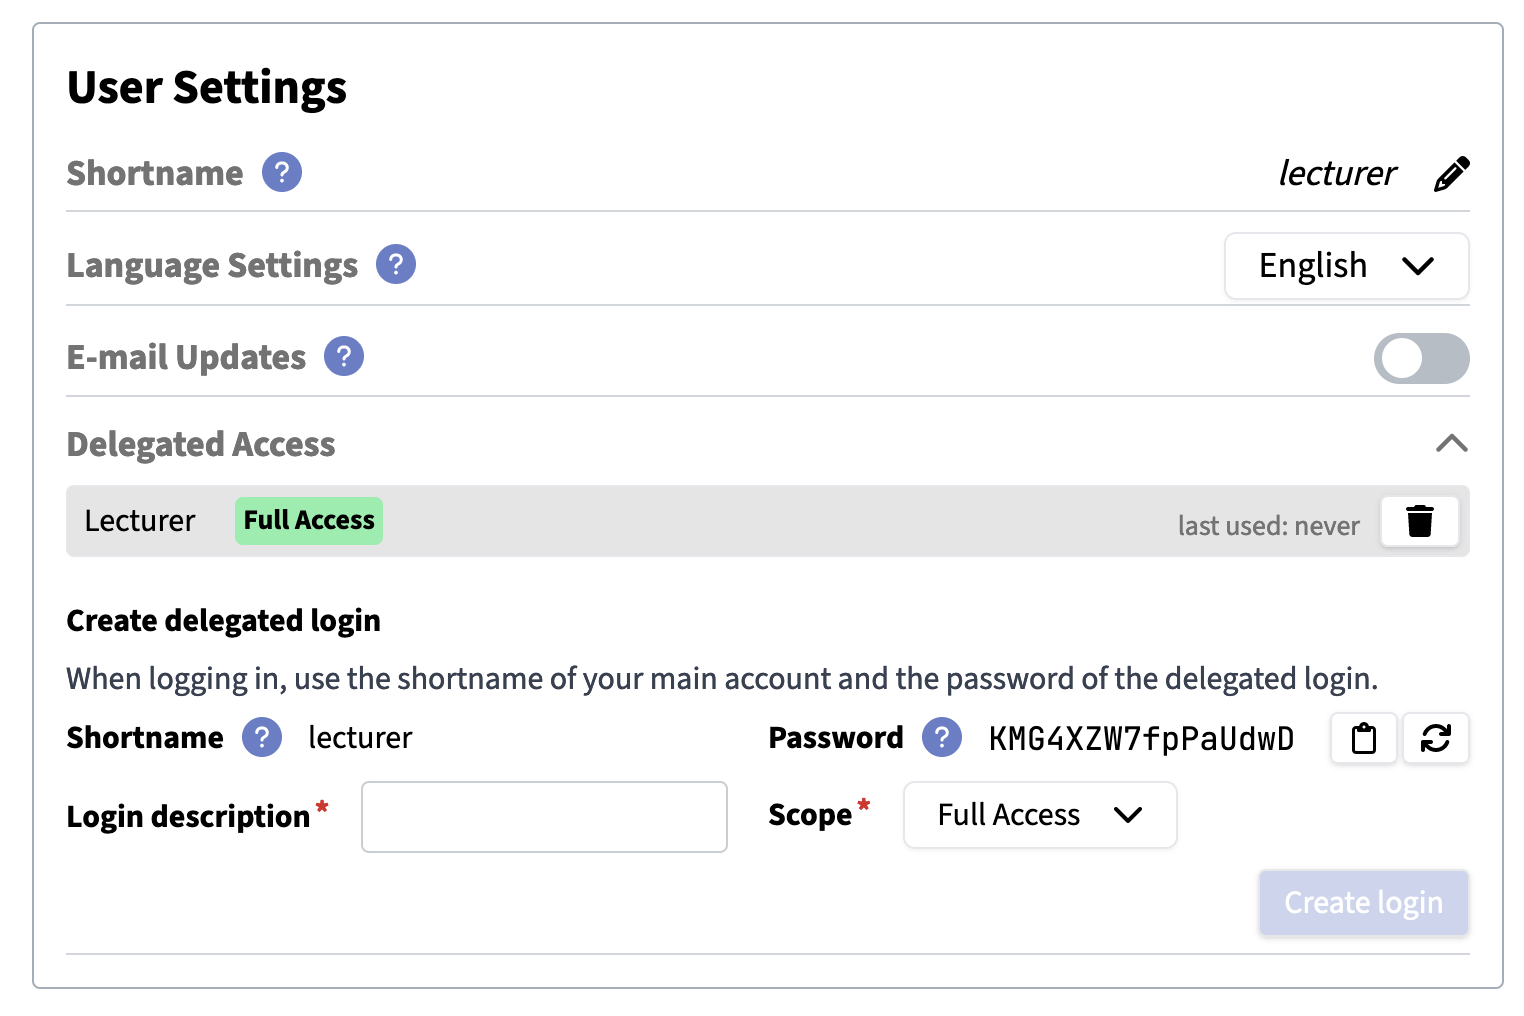 Delegated Access Settings